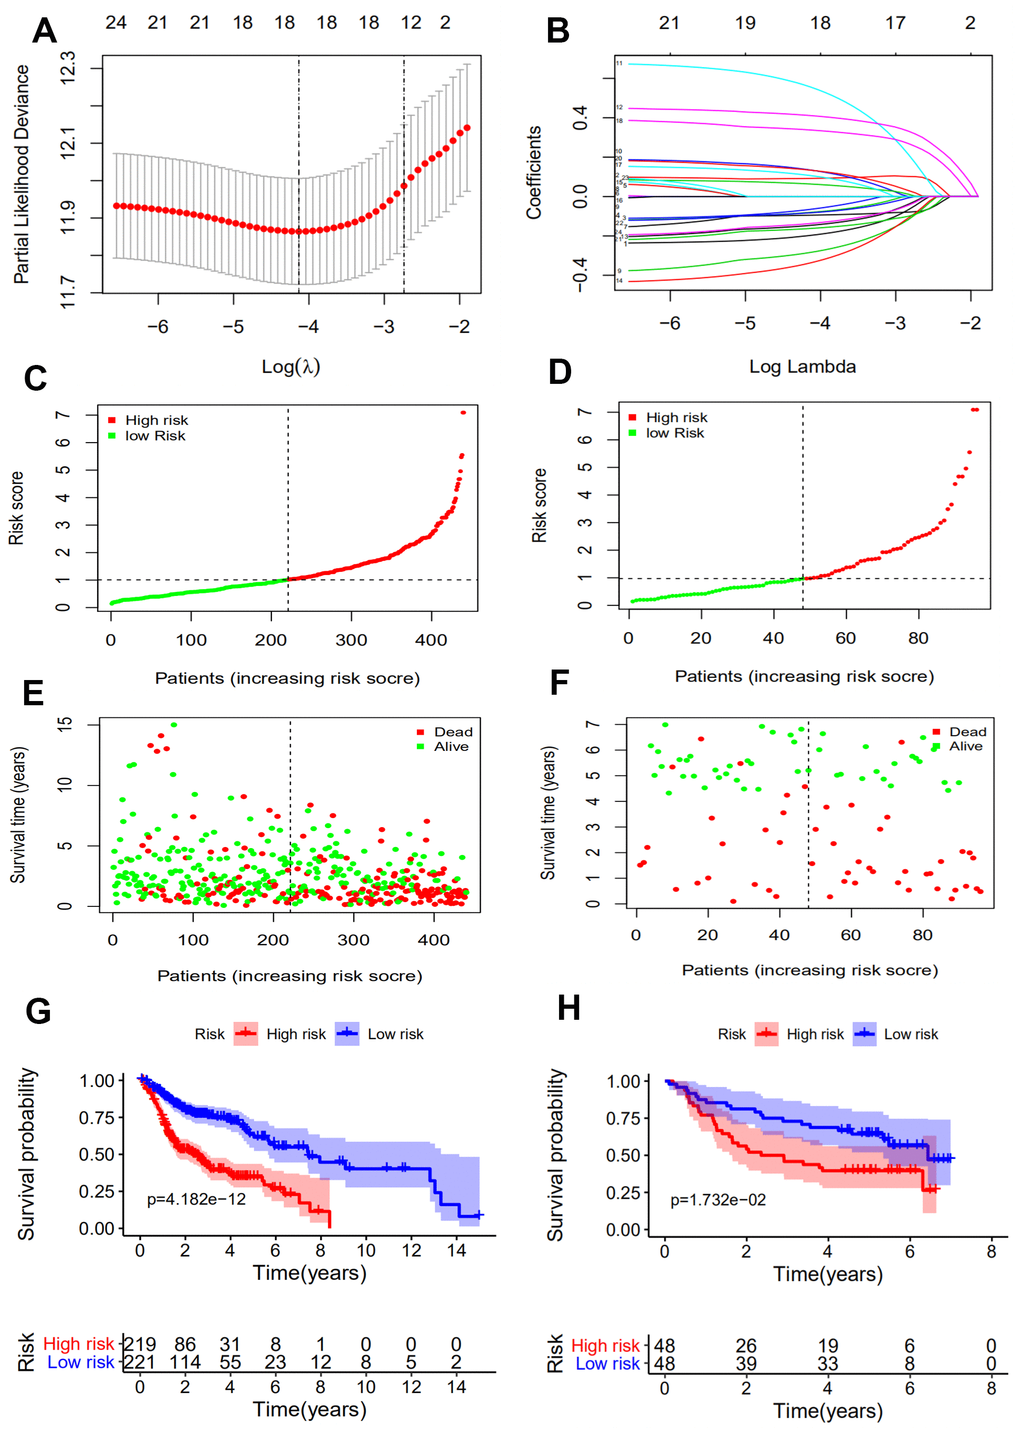 Construction of an immune-related prognostic signature for HNSCC. (A) Eighteen immune-related genes selected by LASSO Cox analysis. (B) A 10-fold cross-validation for the optimal penalty parameter lambda. (C, D) The risk score distribution of HNSCC patients in the training and validation sets. (E, F) Survival status and duration of patients in the training and validation sets. (G, H) Survival curves for the low and high risk groups in the training and validation sets.